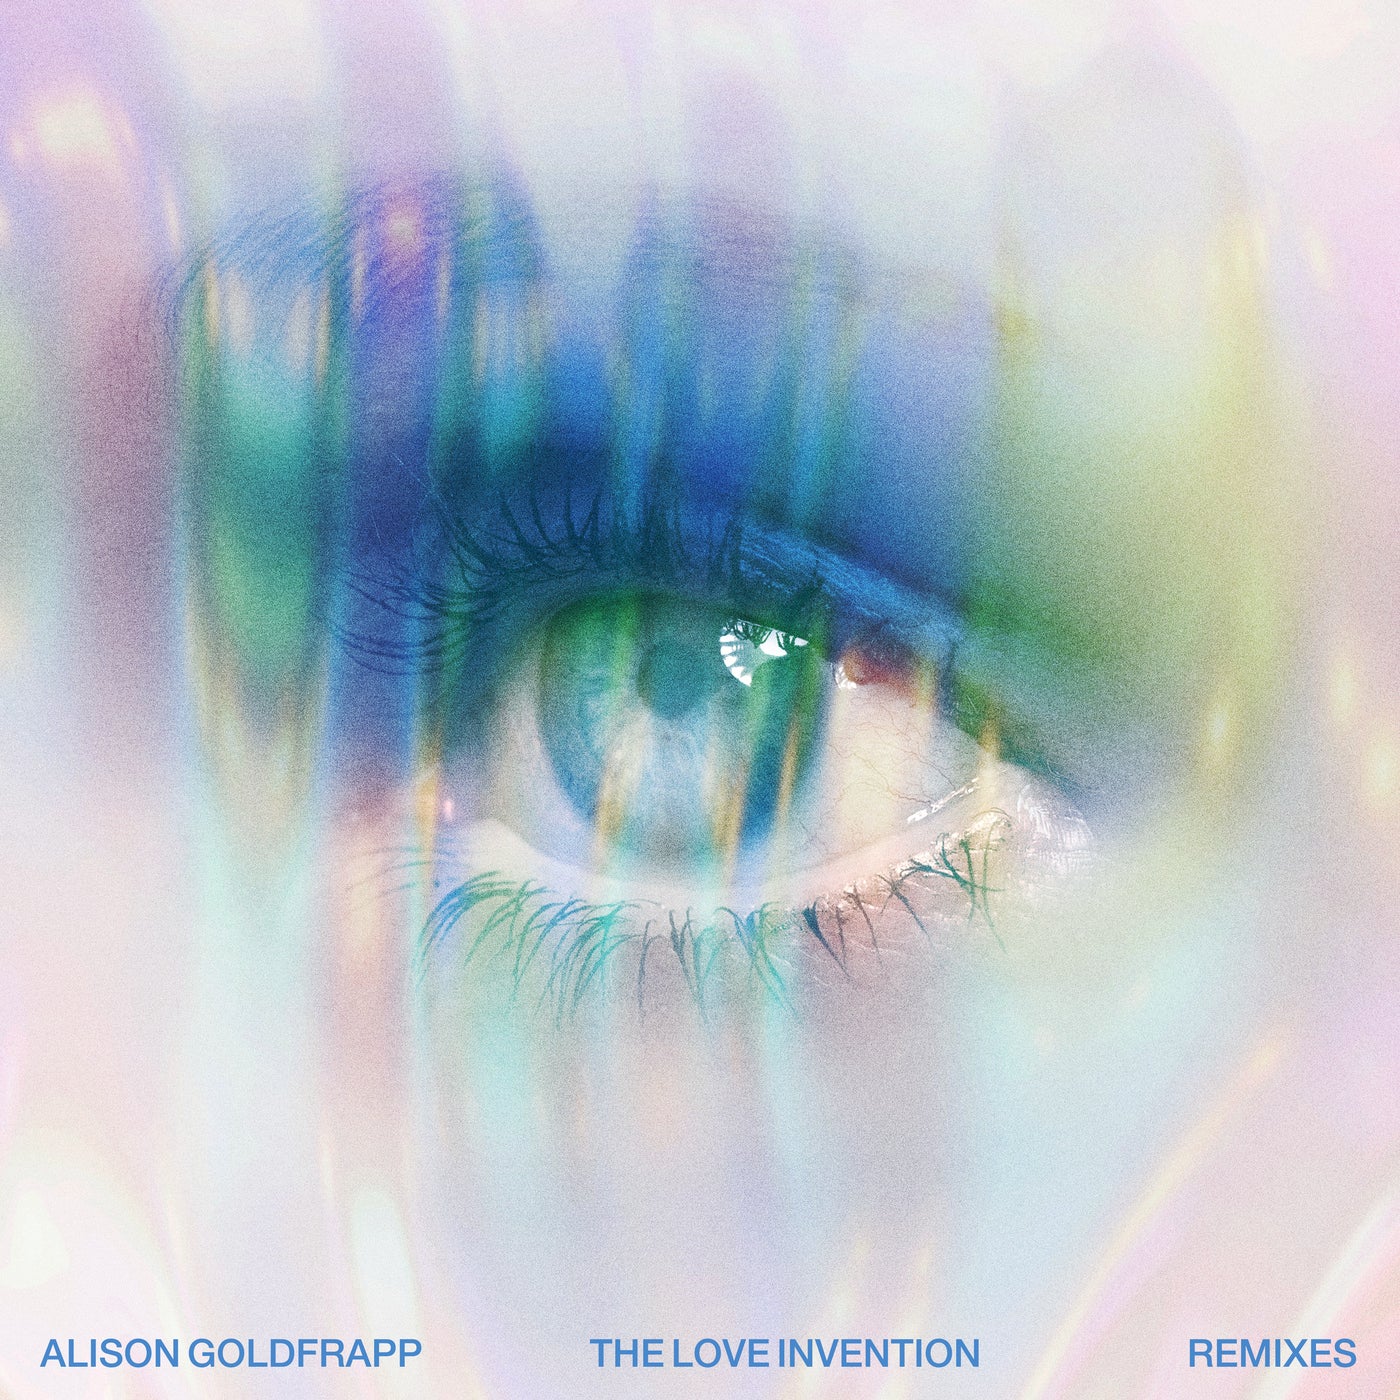 The Love Invention (Remixes)